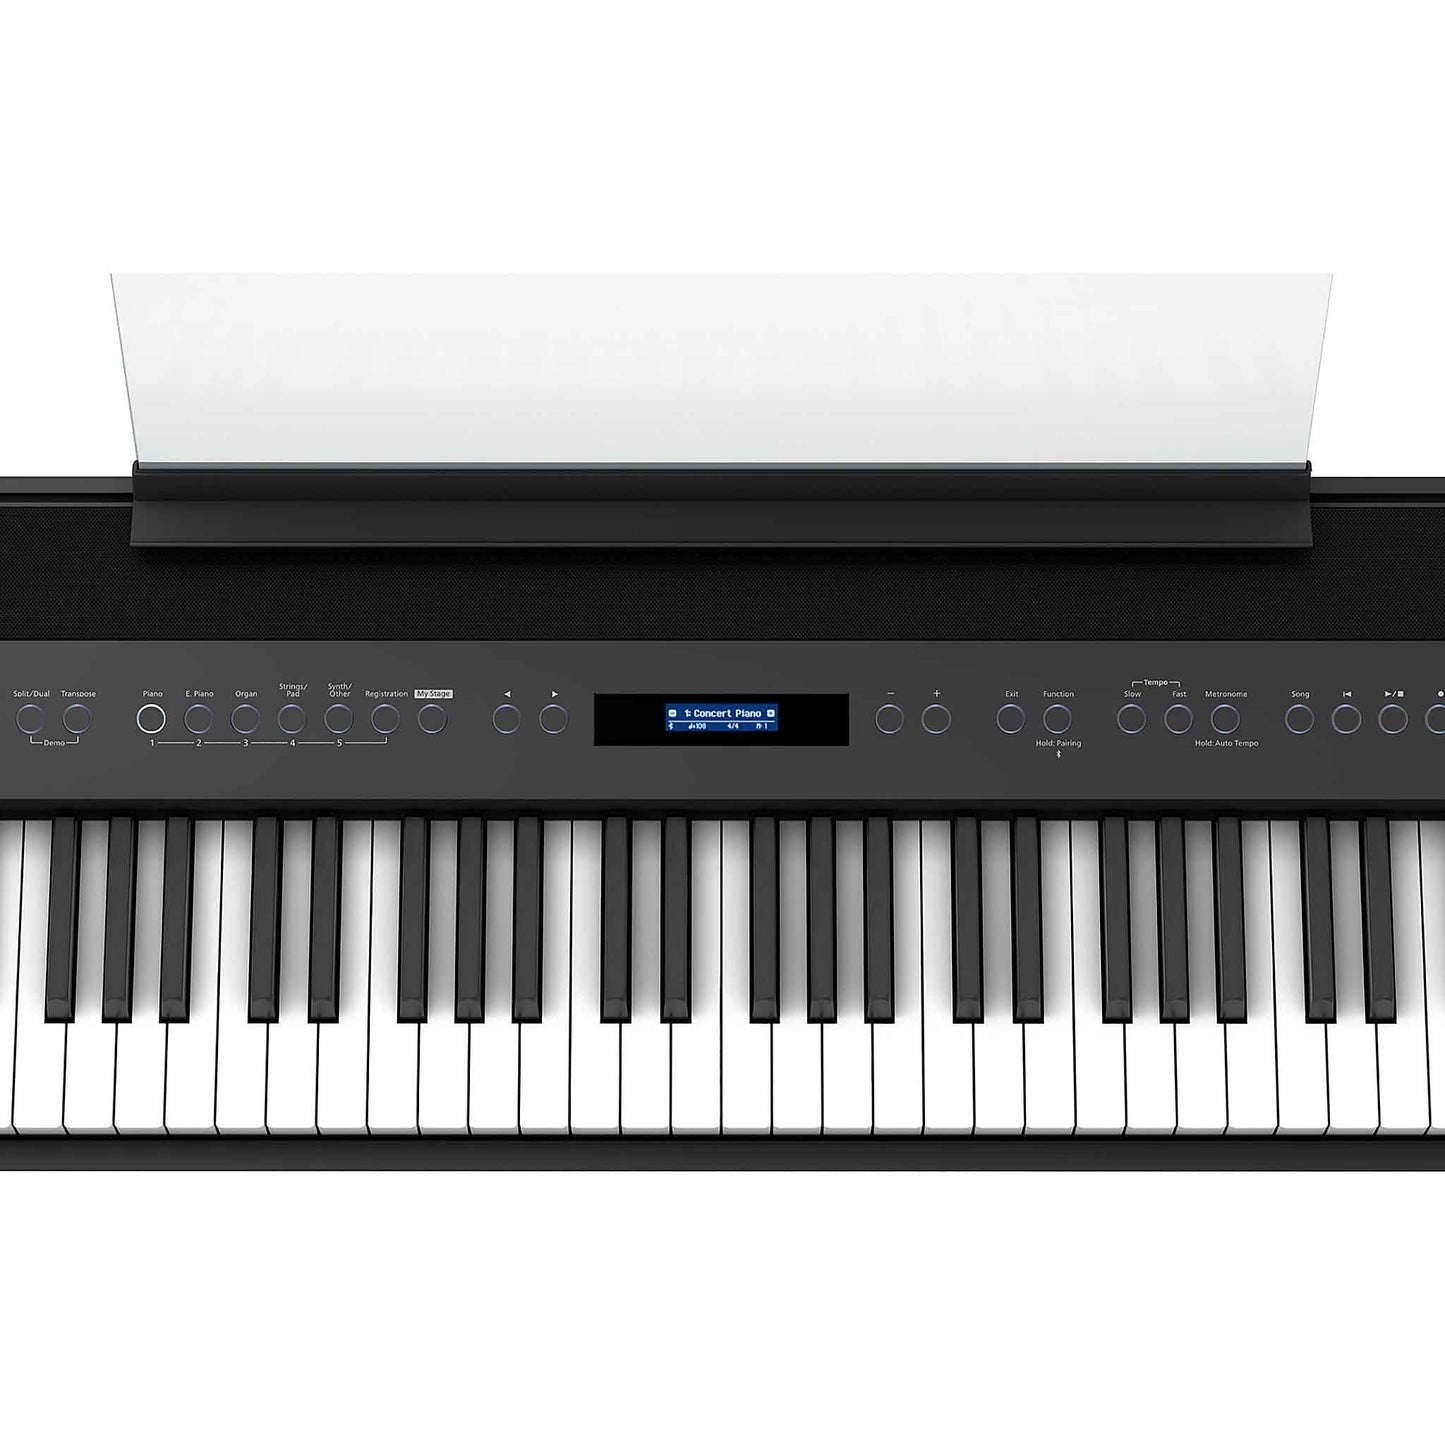 Roland FP60X Digital Piano - Black-Andy's Music